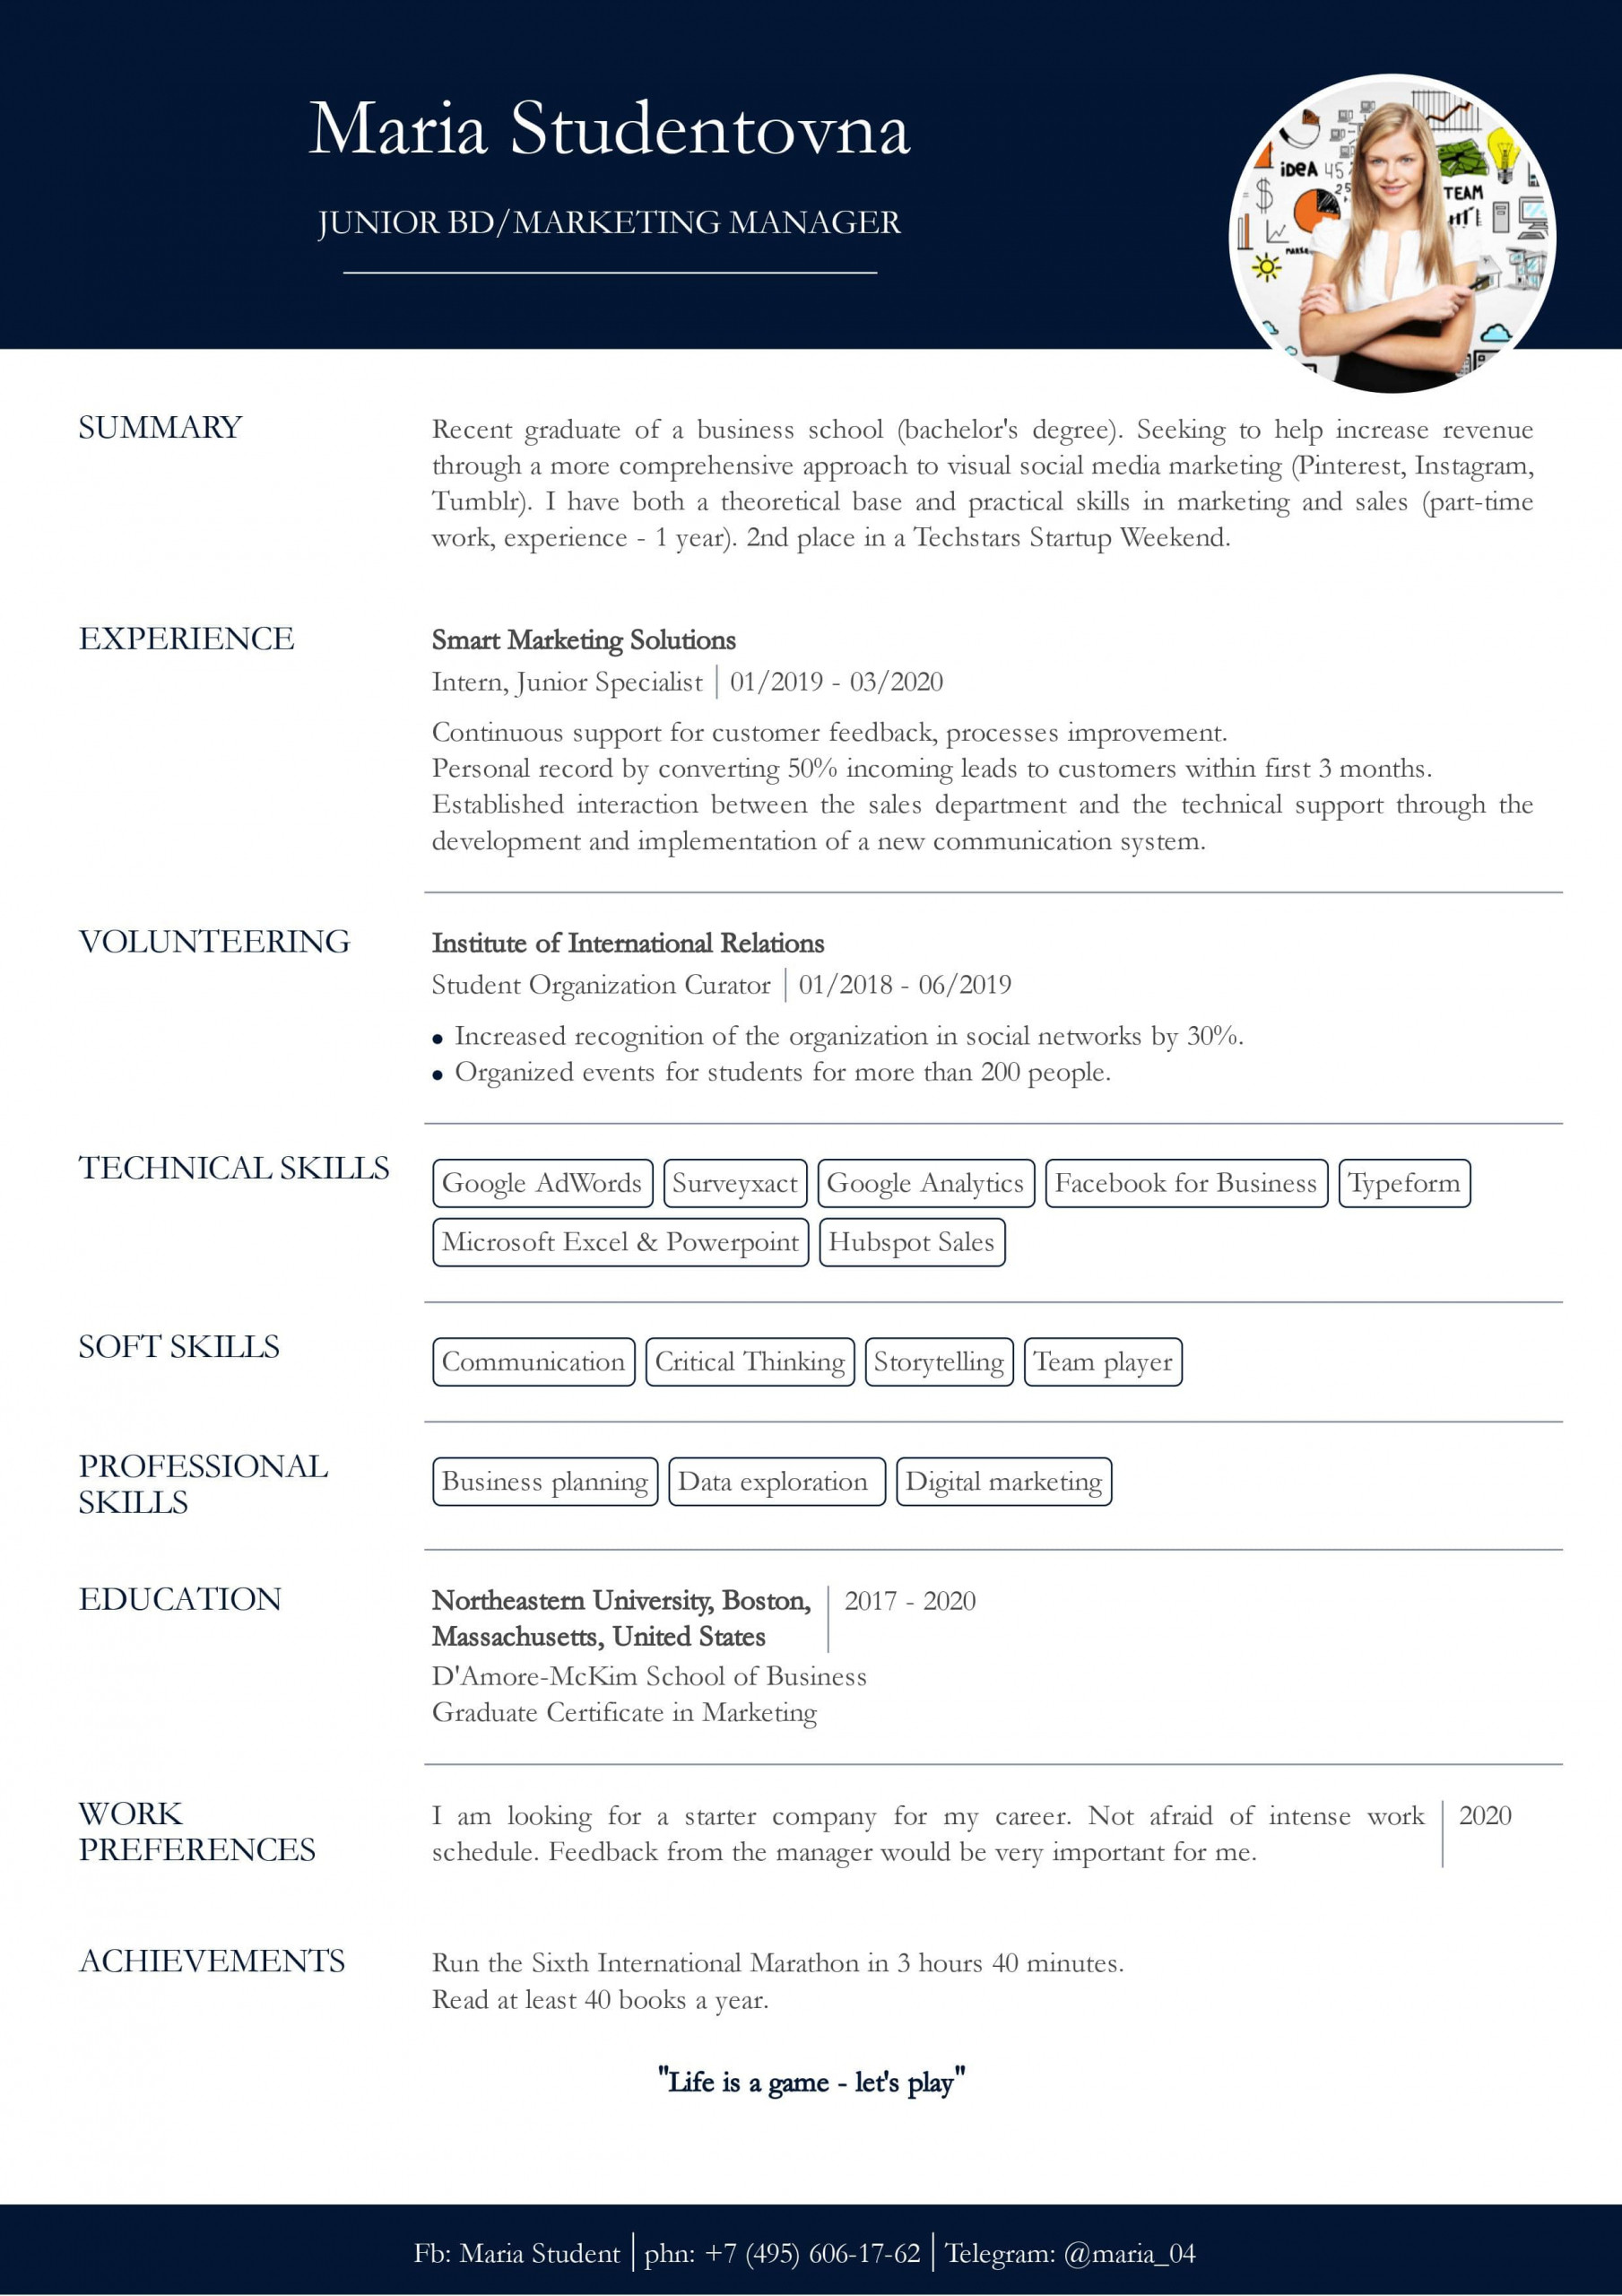 Resume Template No Work Experience College Resume with No Work Experience. Sample for Students. – Cv2you Blog